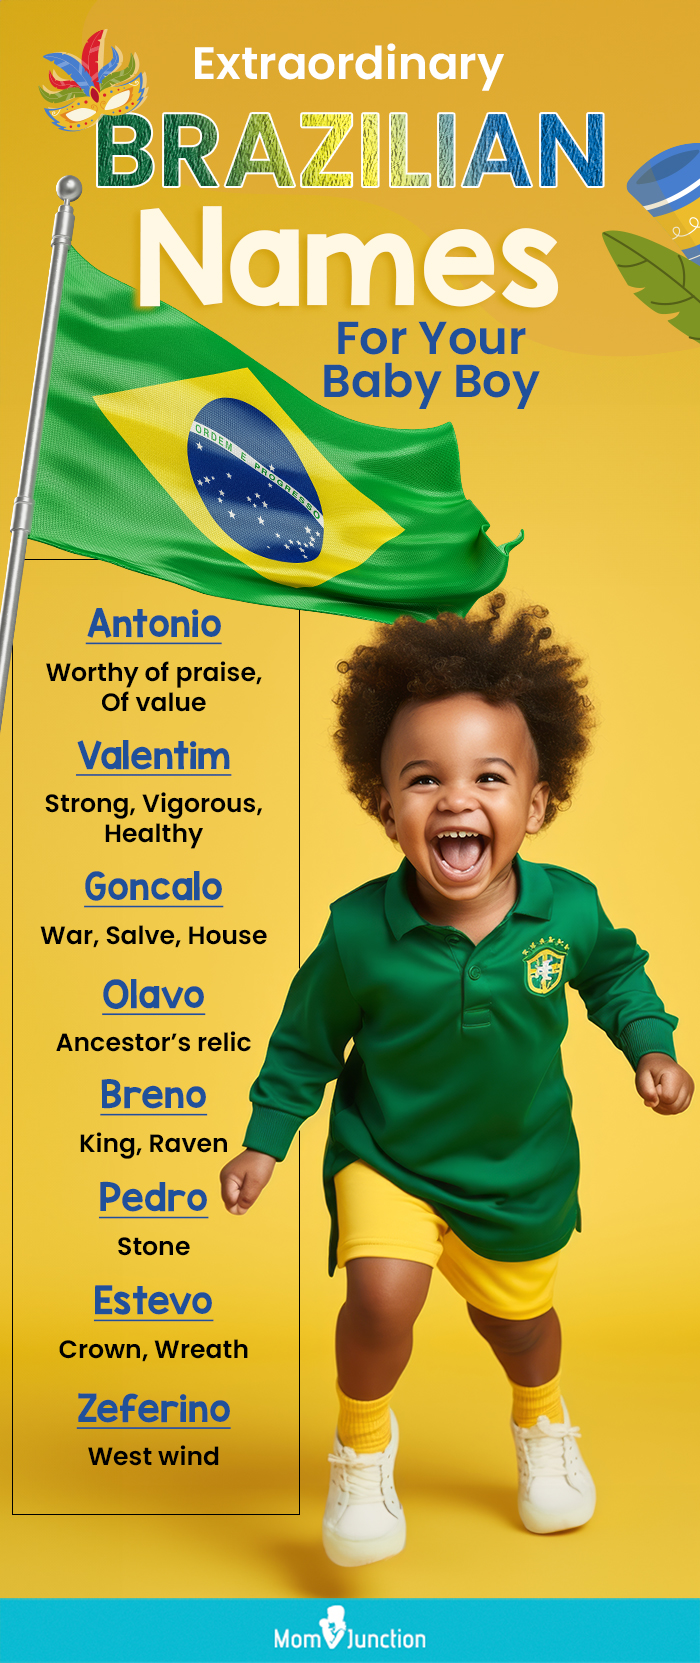 Extraordinary Brazilian Names For Your Baby Boy (infographic)